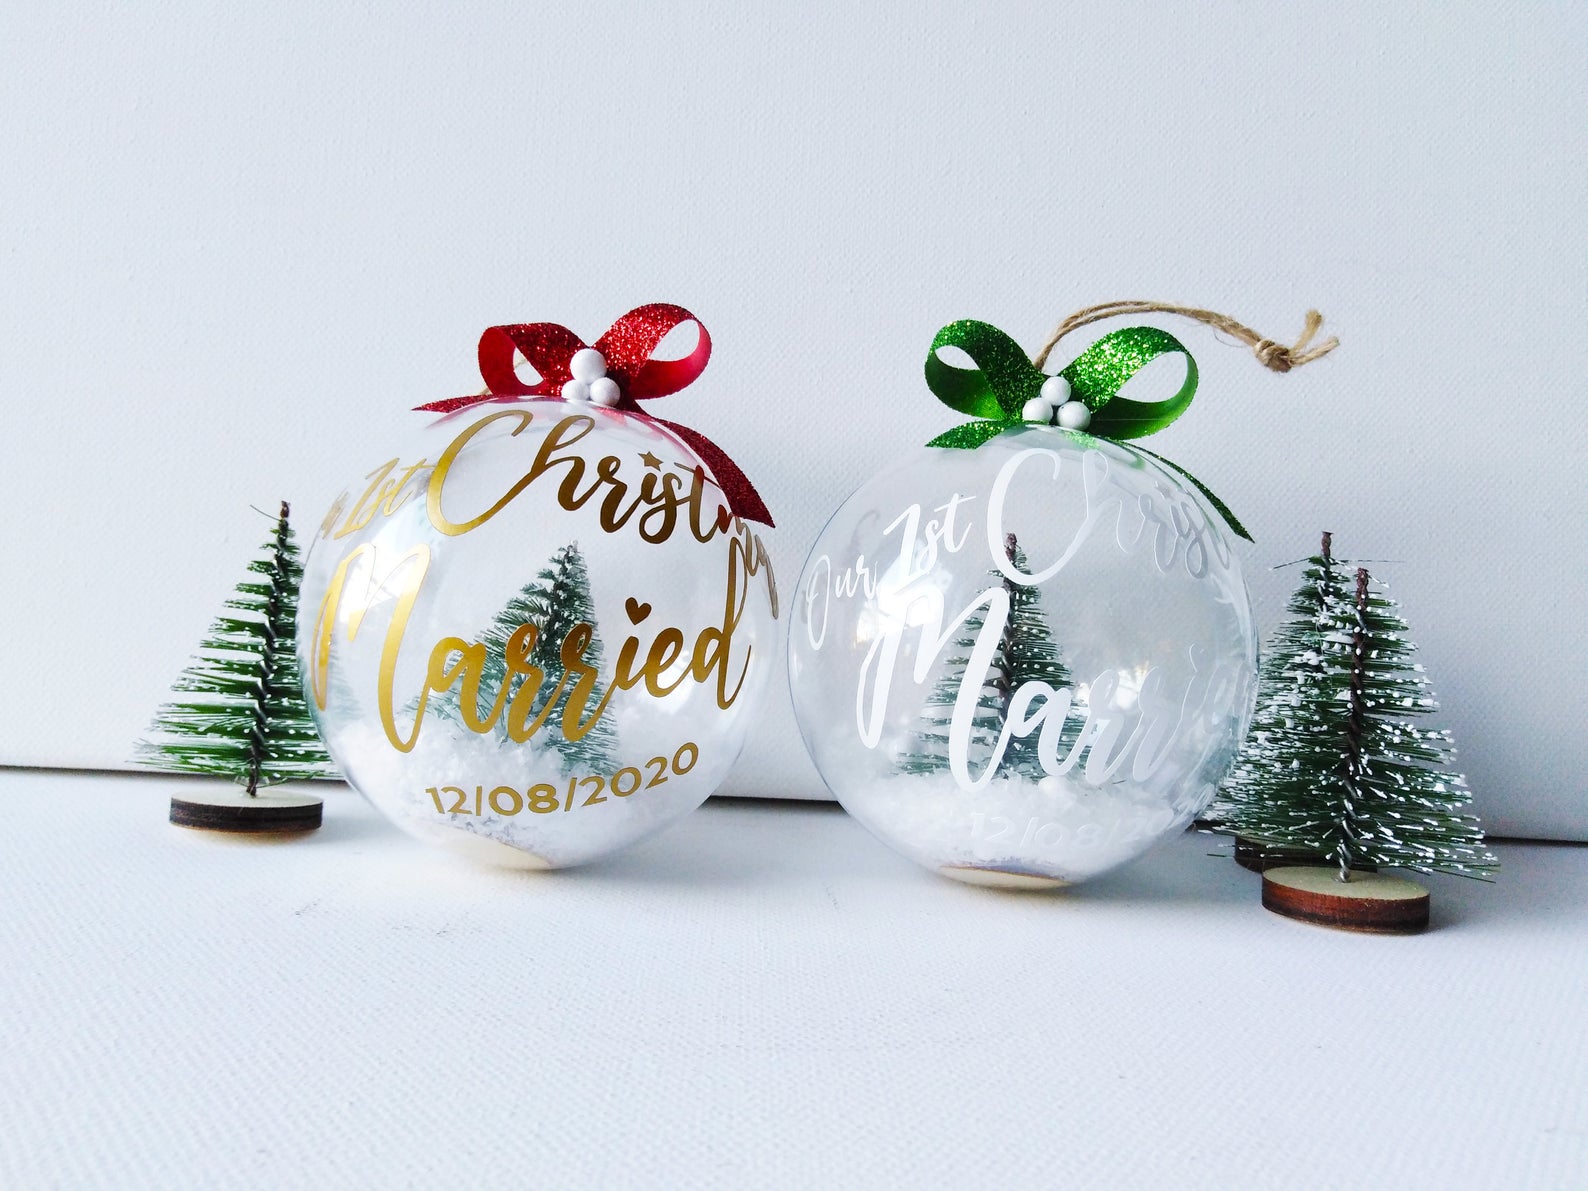 Decorations with Red Cars and Full Cars 2020 The First Xmas Decorations Wedding Presents for Newlywed Crystal Glass Holiday Decoration… 2020 Christmas Ornaments Our First Christmas As Mr and Mrs